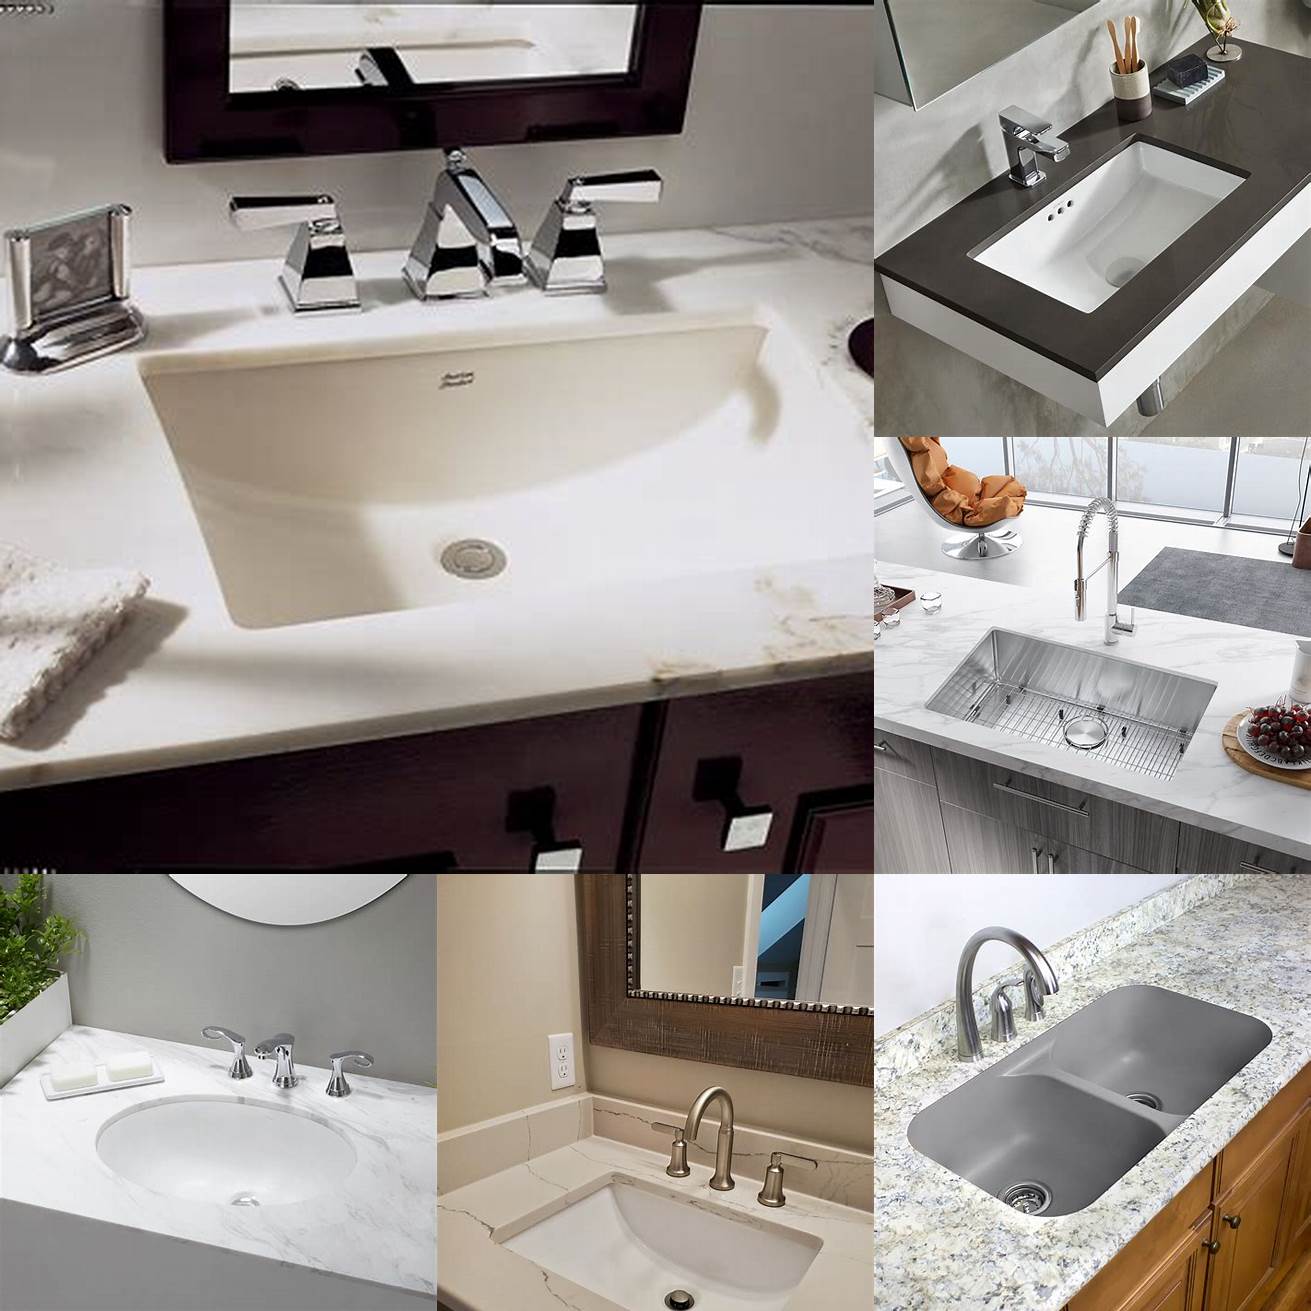 Undermount sinks are installed below the countertop giving your bathroom a seamless and sleek look They are easy to clean and maintain and provide more countertop space than other types of sinks However they require professional installation and can be more expensive than other types of sinks